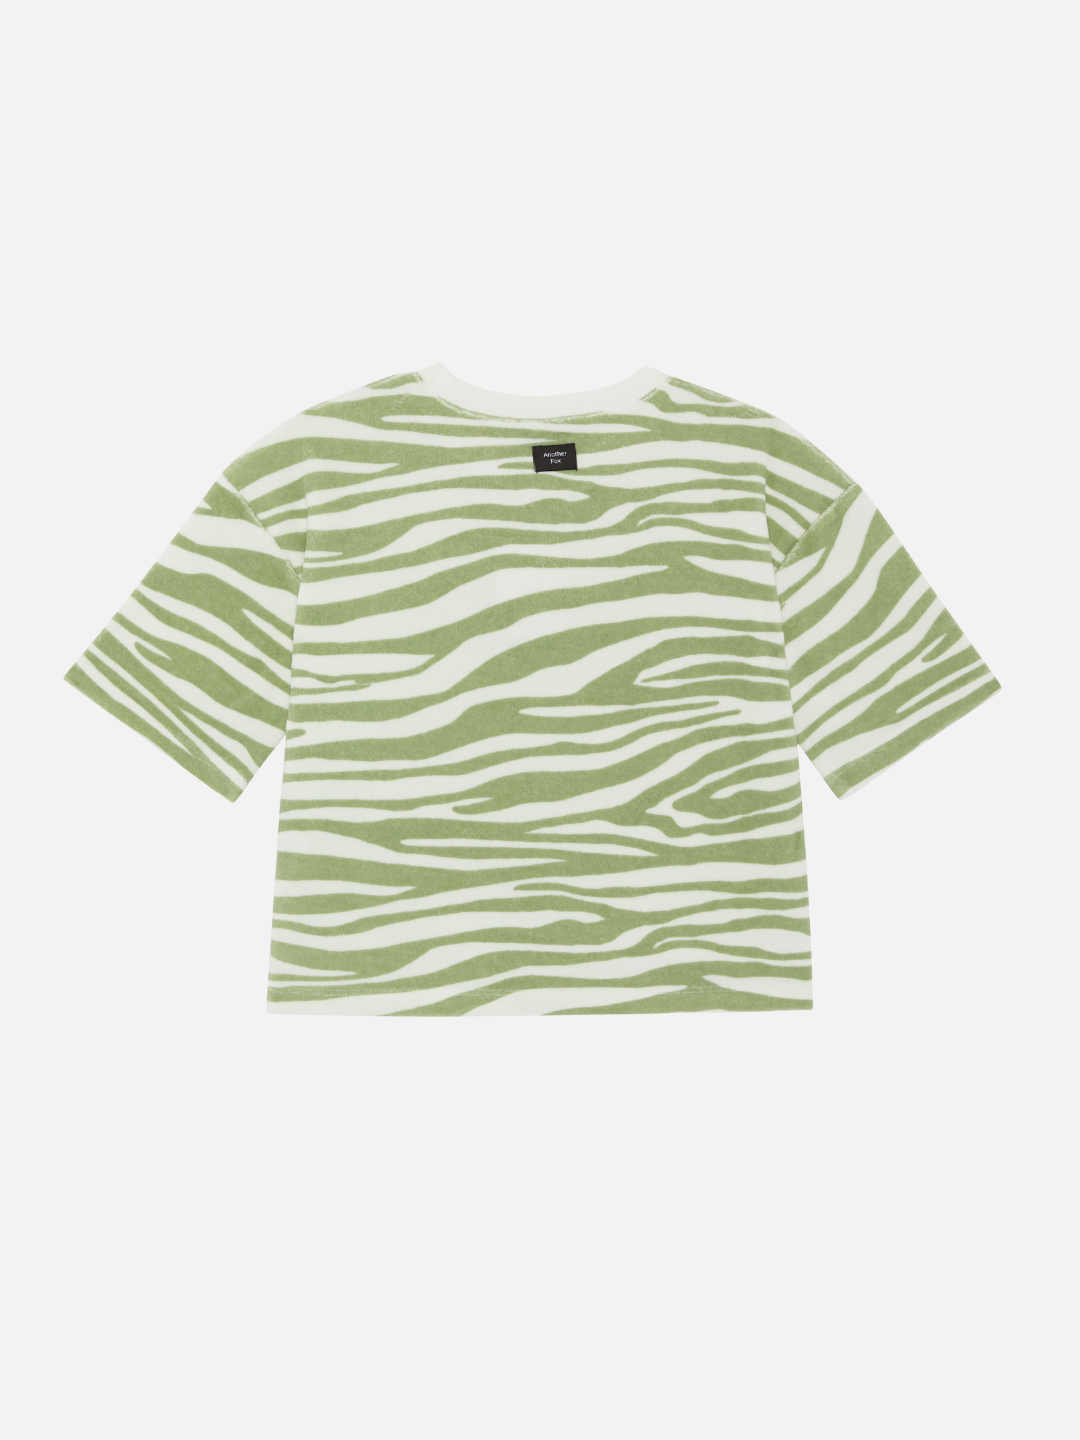 Tiger | A back view of the kid's tee in green tiger print